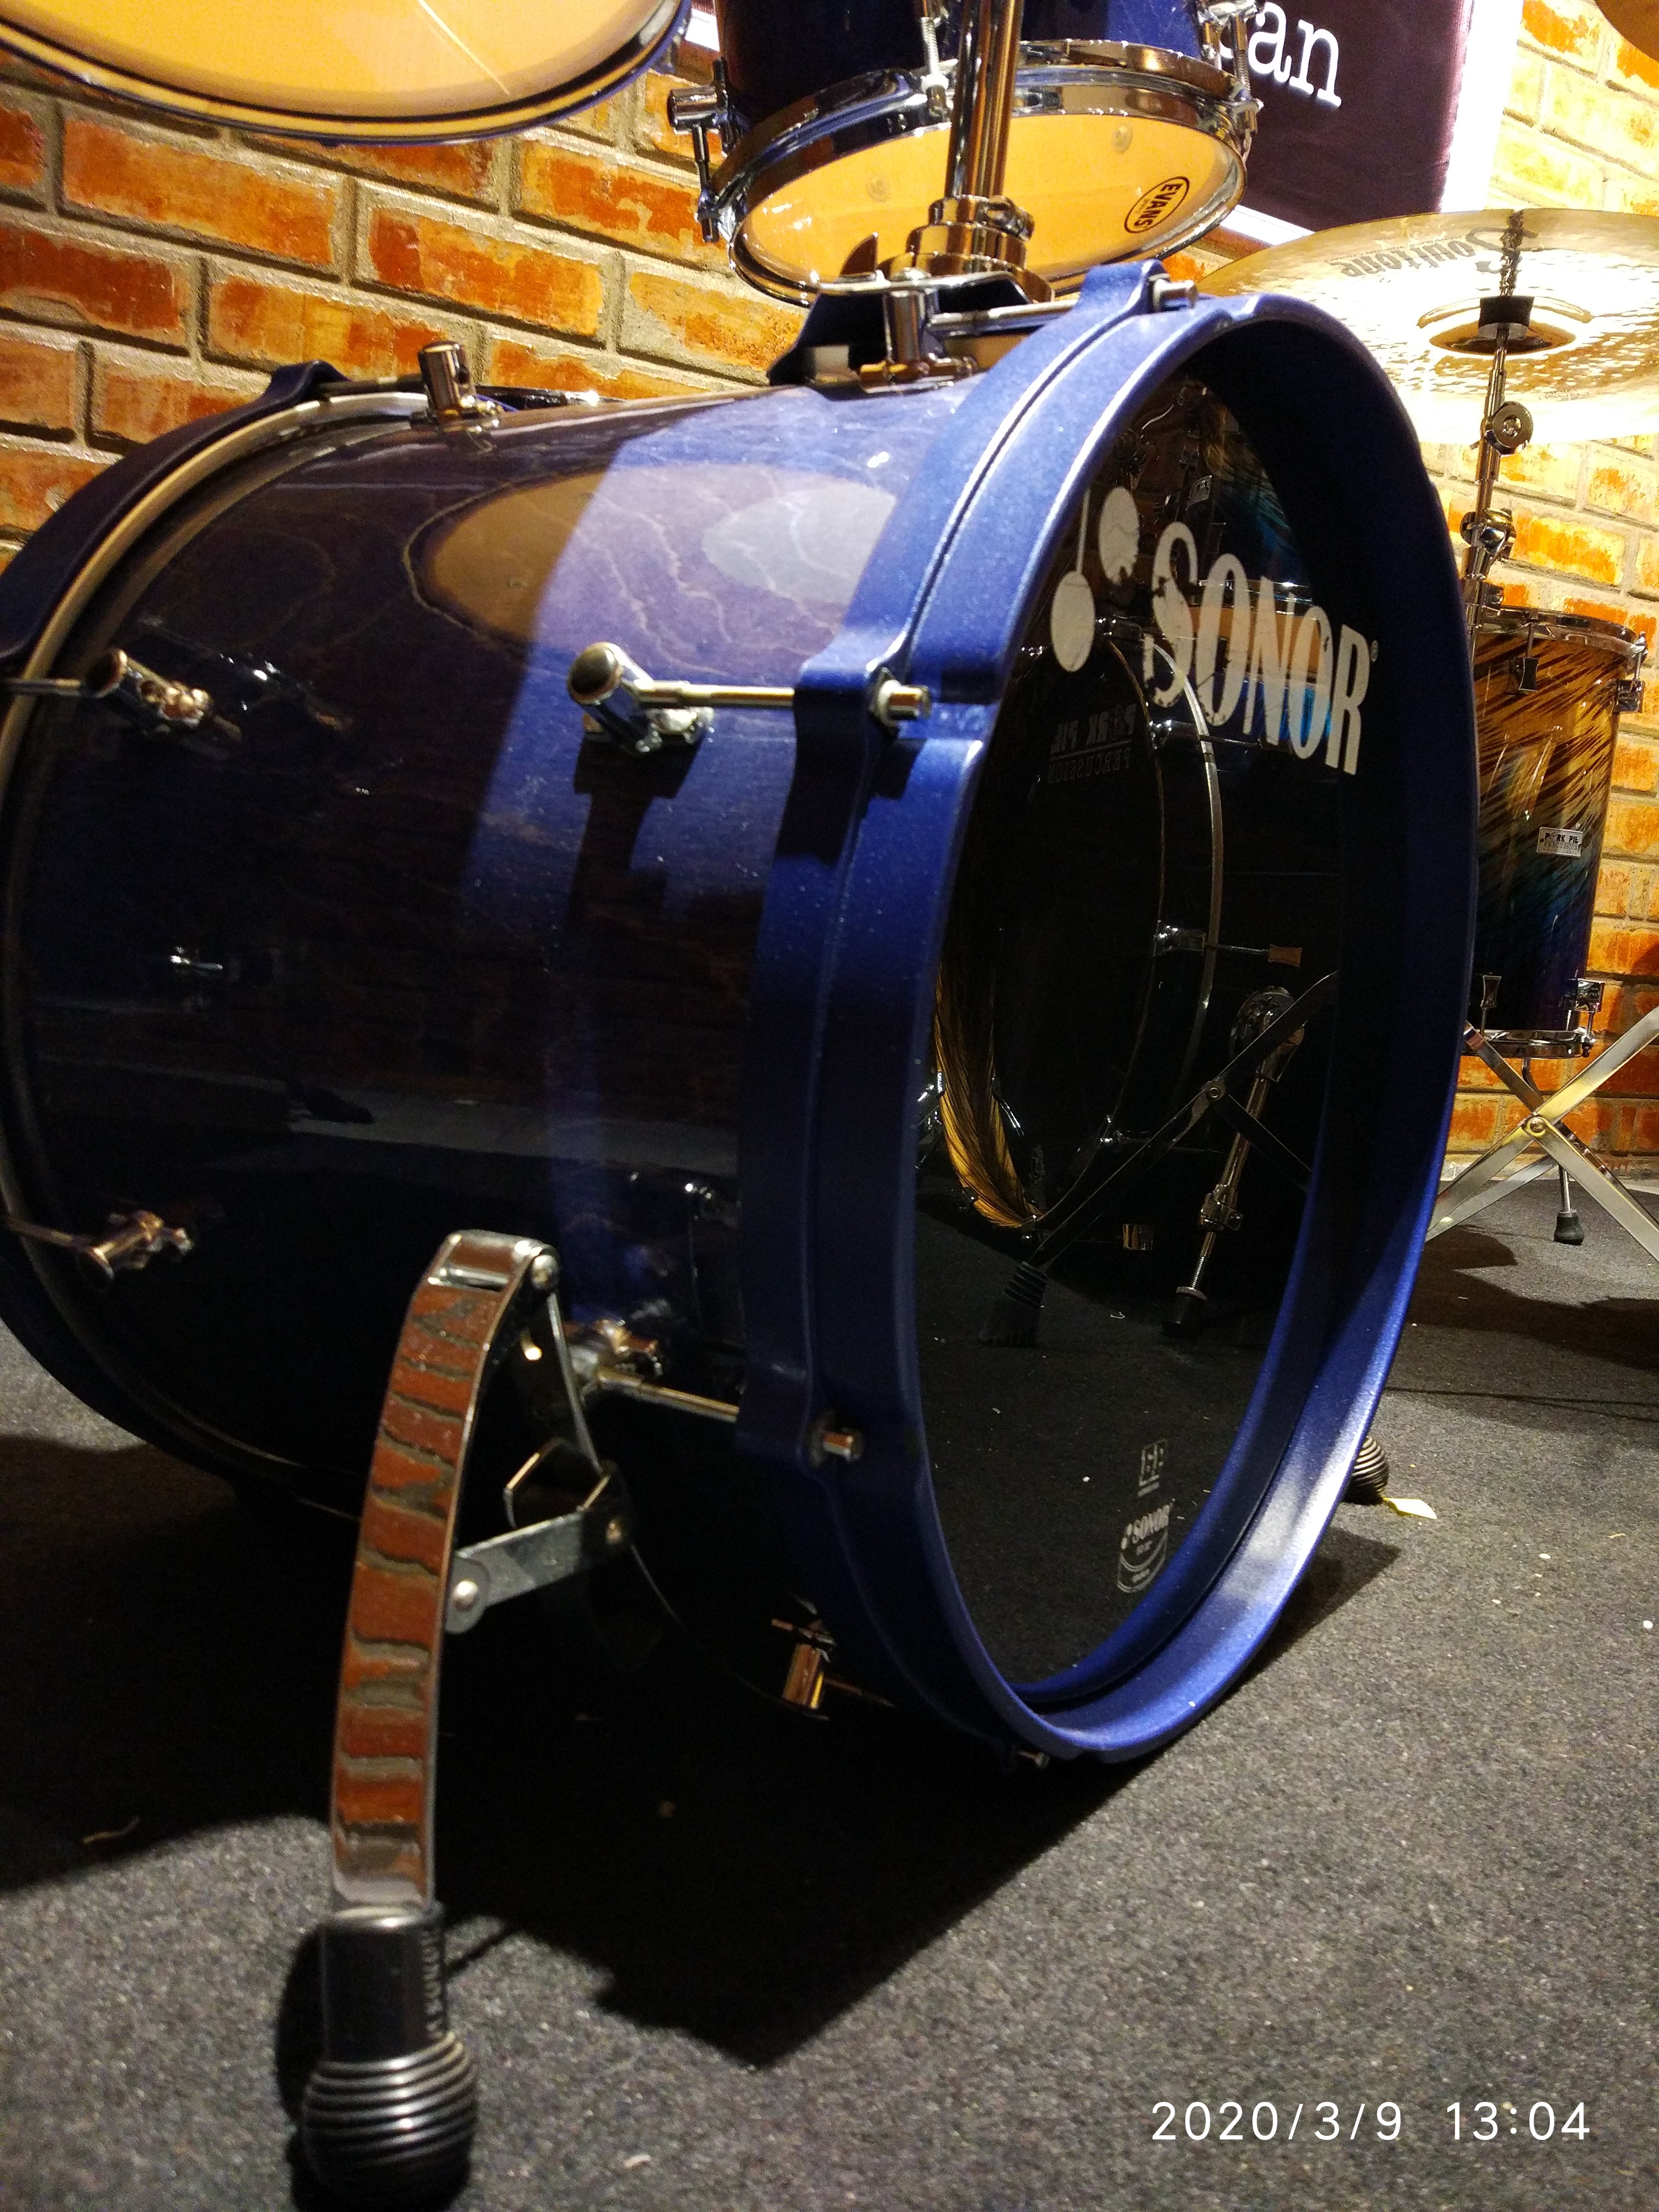 Sonor S Class Blue Series. Vintage 1980s. Made in Germany. Mint Condition